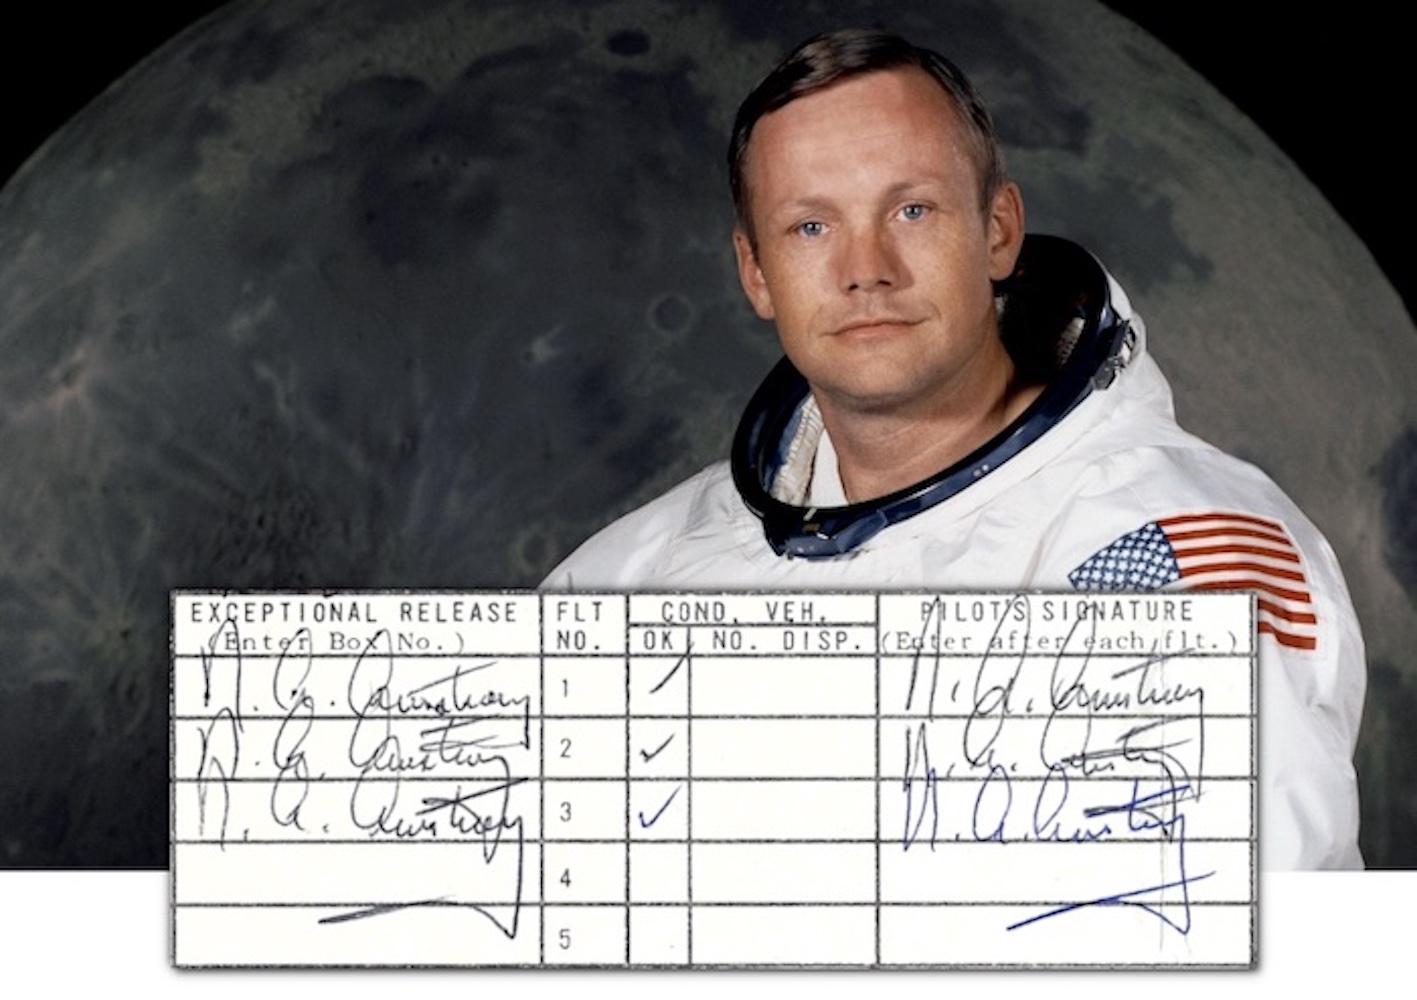 A highly rare and important document from the Apollo 11 mission
Neil Armstrong's official flight log for his training in the Lunar Landing Test Vehicle (LLTV)
Signed an incredible six times by Armstrong
This is the official NASA operation log for